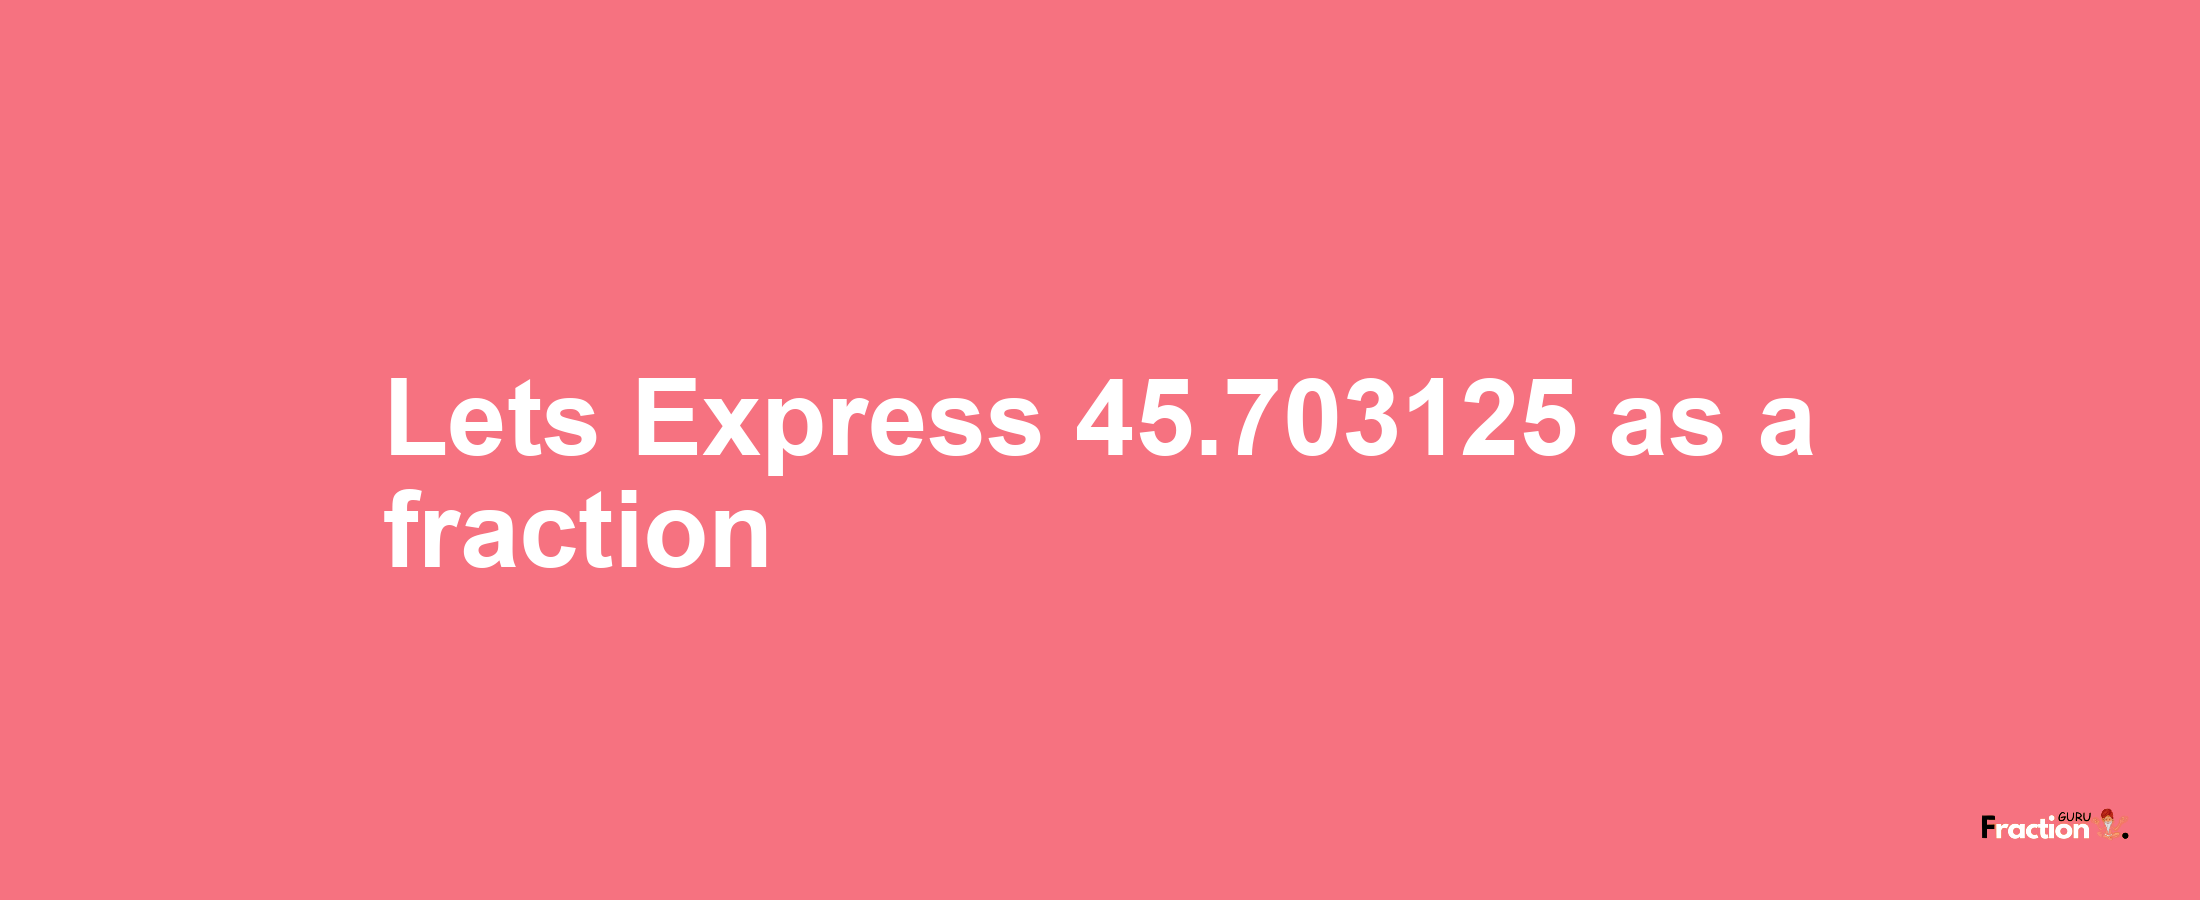 Lets Express 45.703125 as afraction